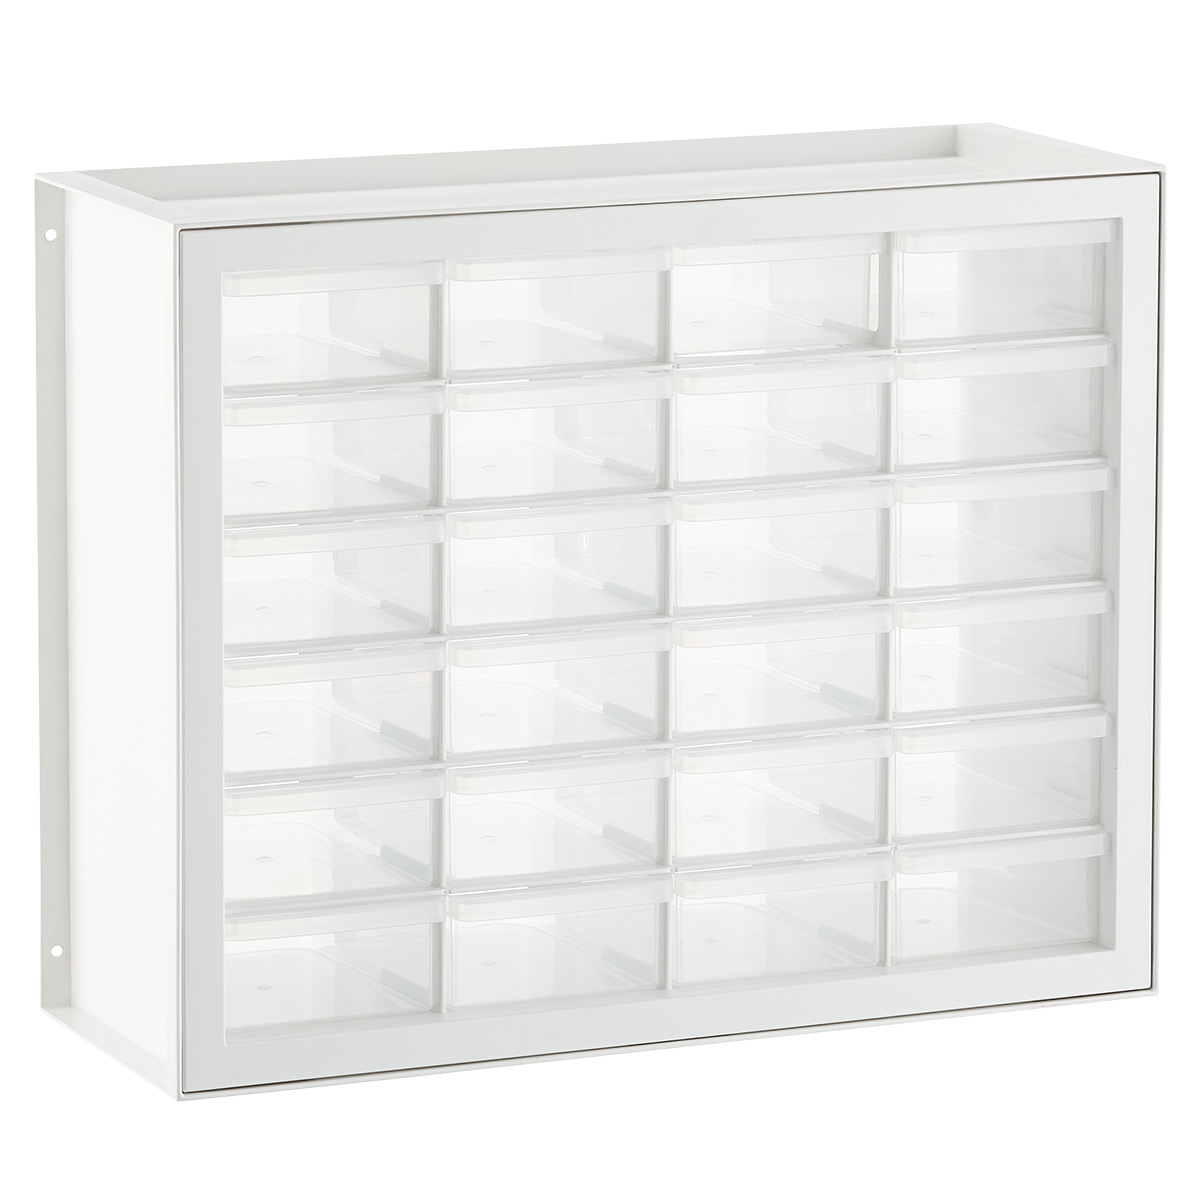 https://www.containerstore.com/catalogimages/390819/10080892-24-drawer-cabinet-white-v3.jpg